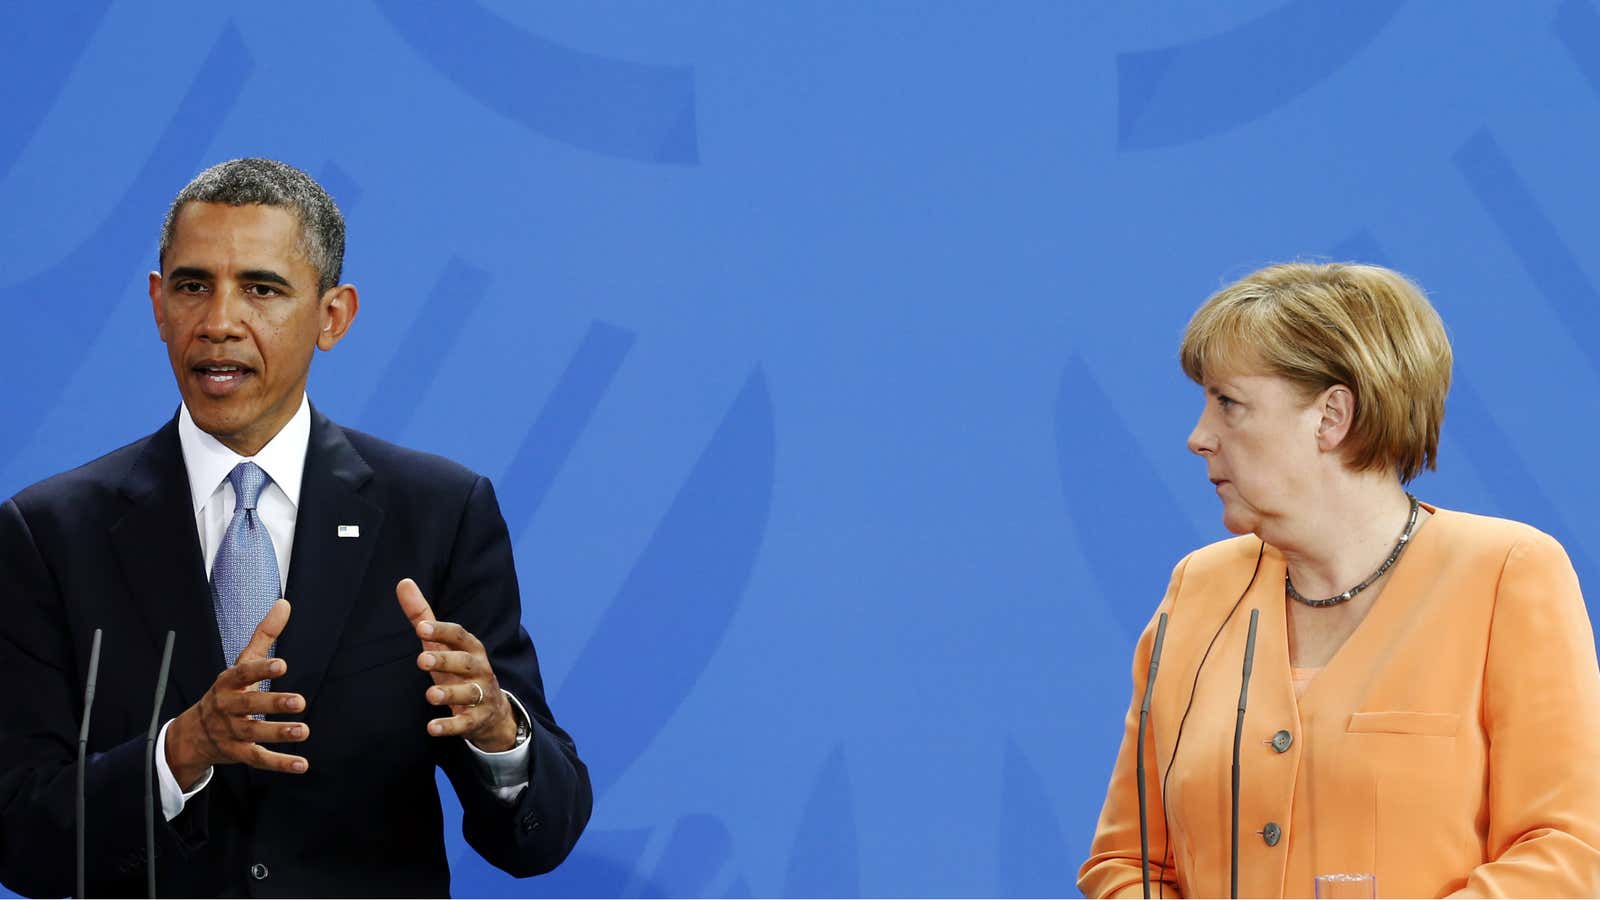 Germany is not impressed by fiscal advice from the US.